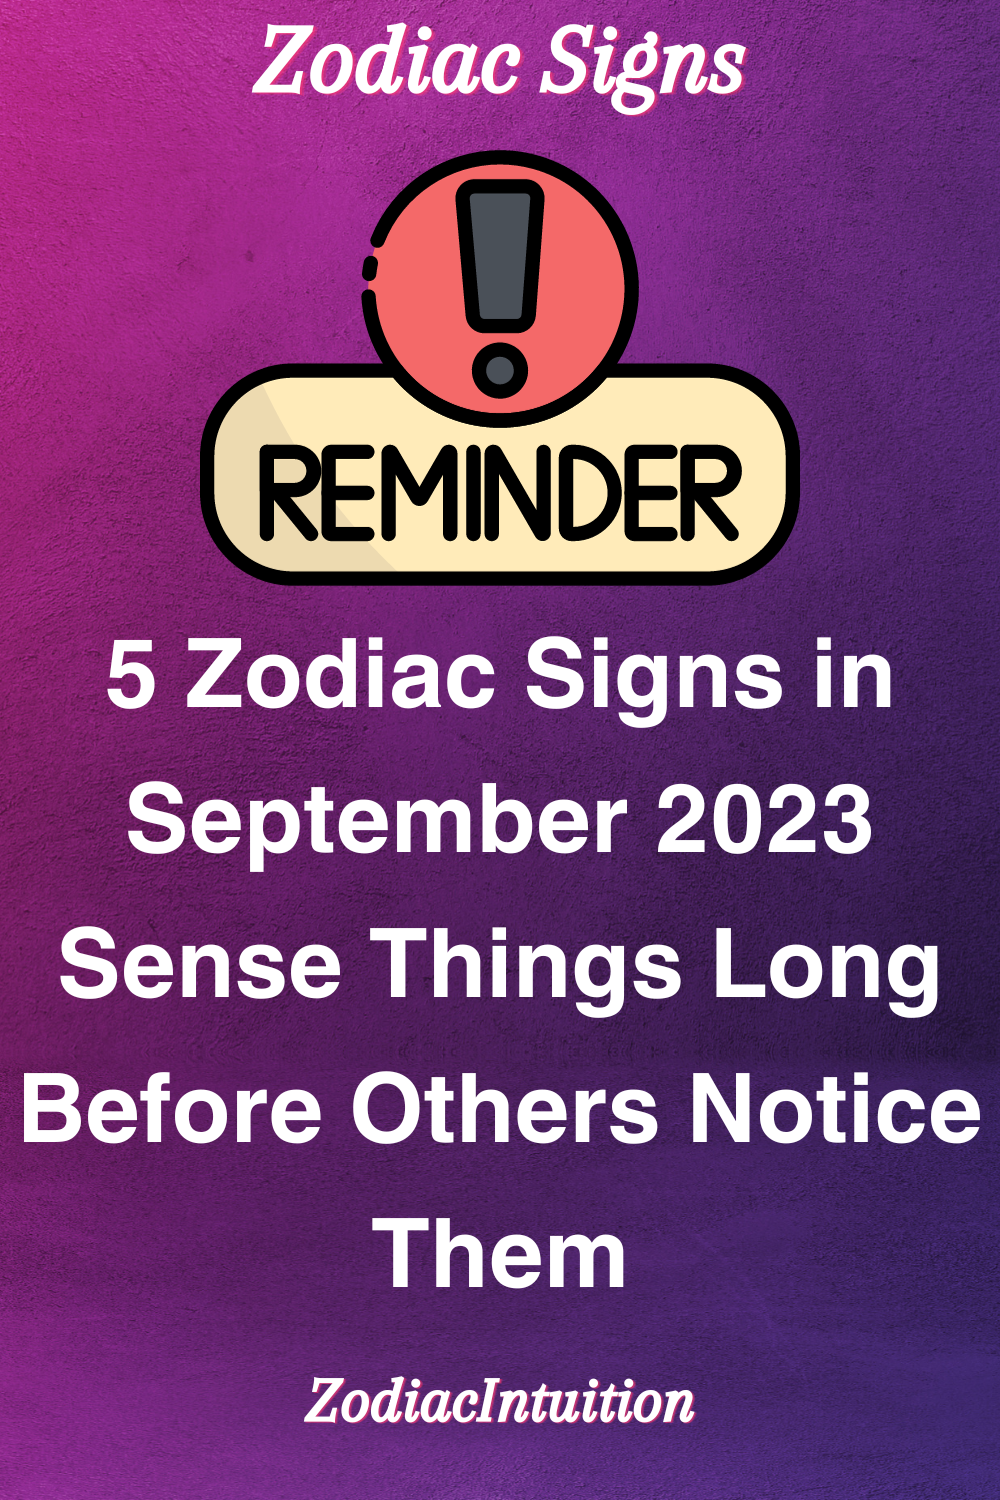 5 Zodiac Signs in September 2023 Sense Things Long Before Others Notice Them